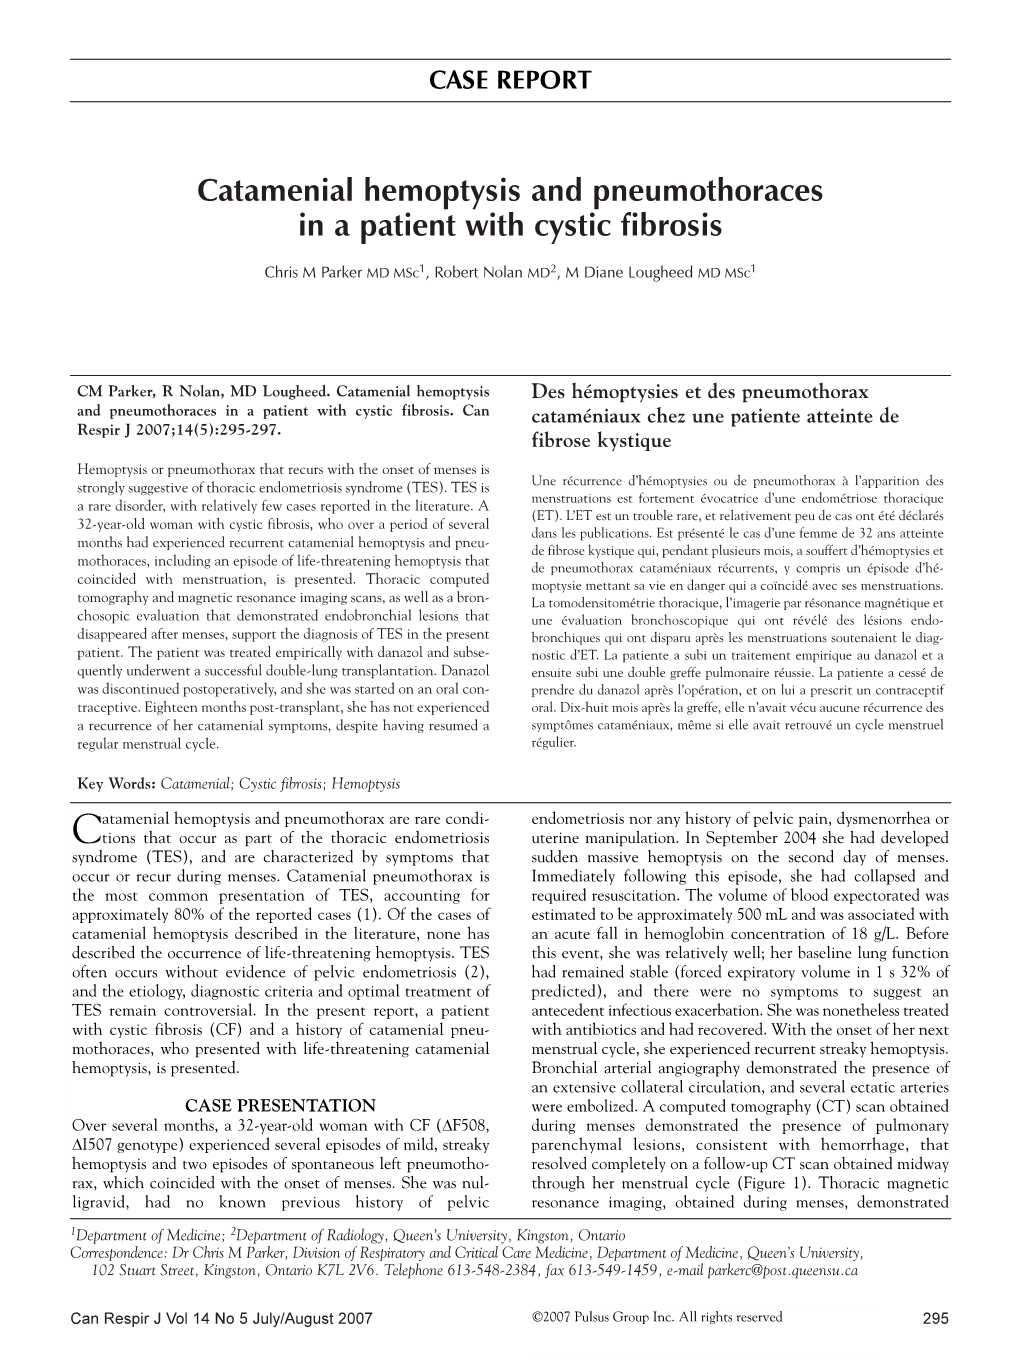 Catamenial Hemoptysis and Pneumothoraces in a Patient with Cystic Fibrosis